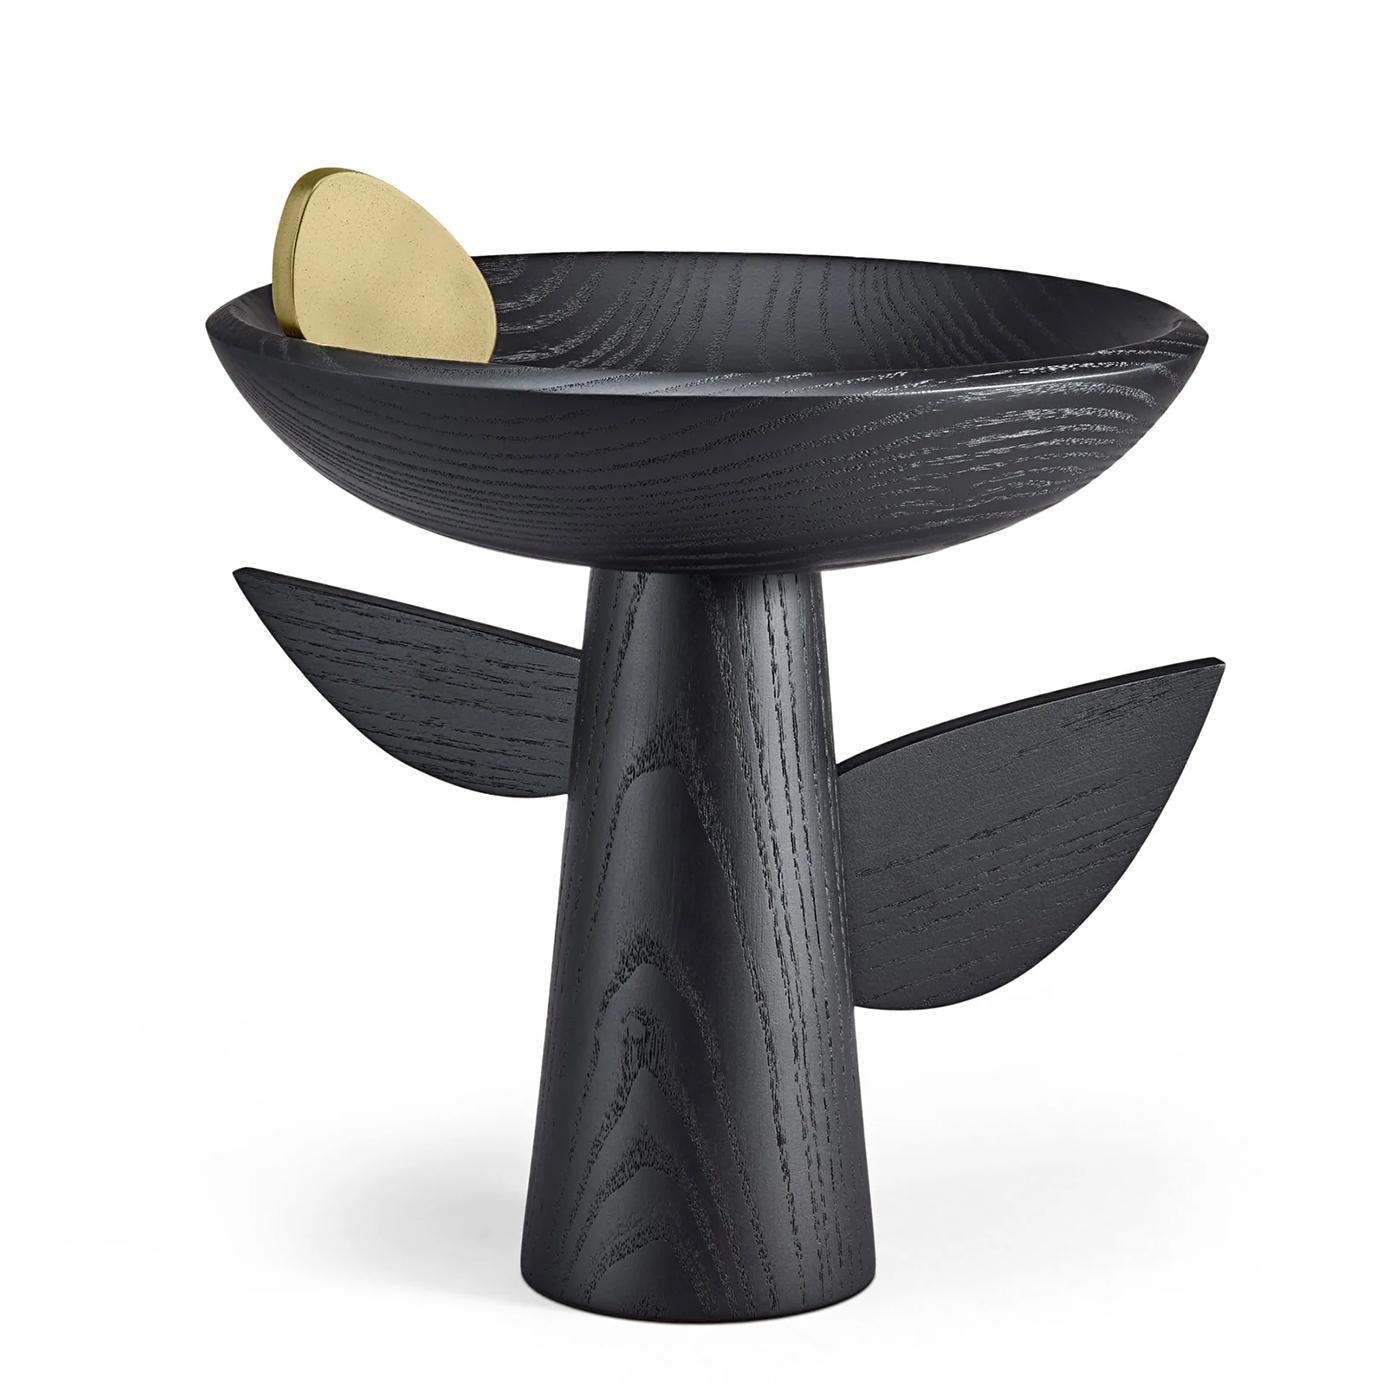 Bowl oak black with all structure in solid oak
in ebonized finish and ornamented with solid
brass decoration detail.